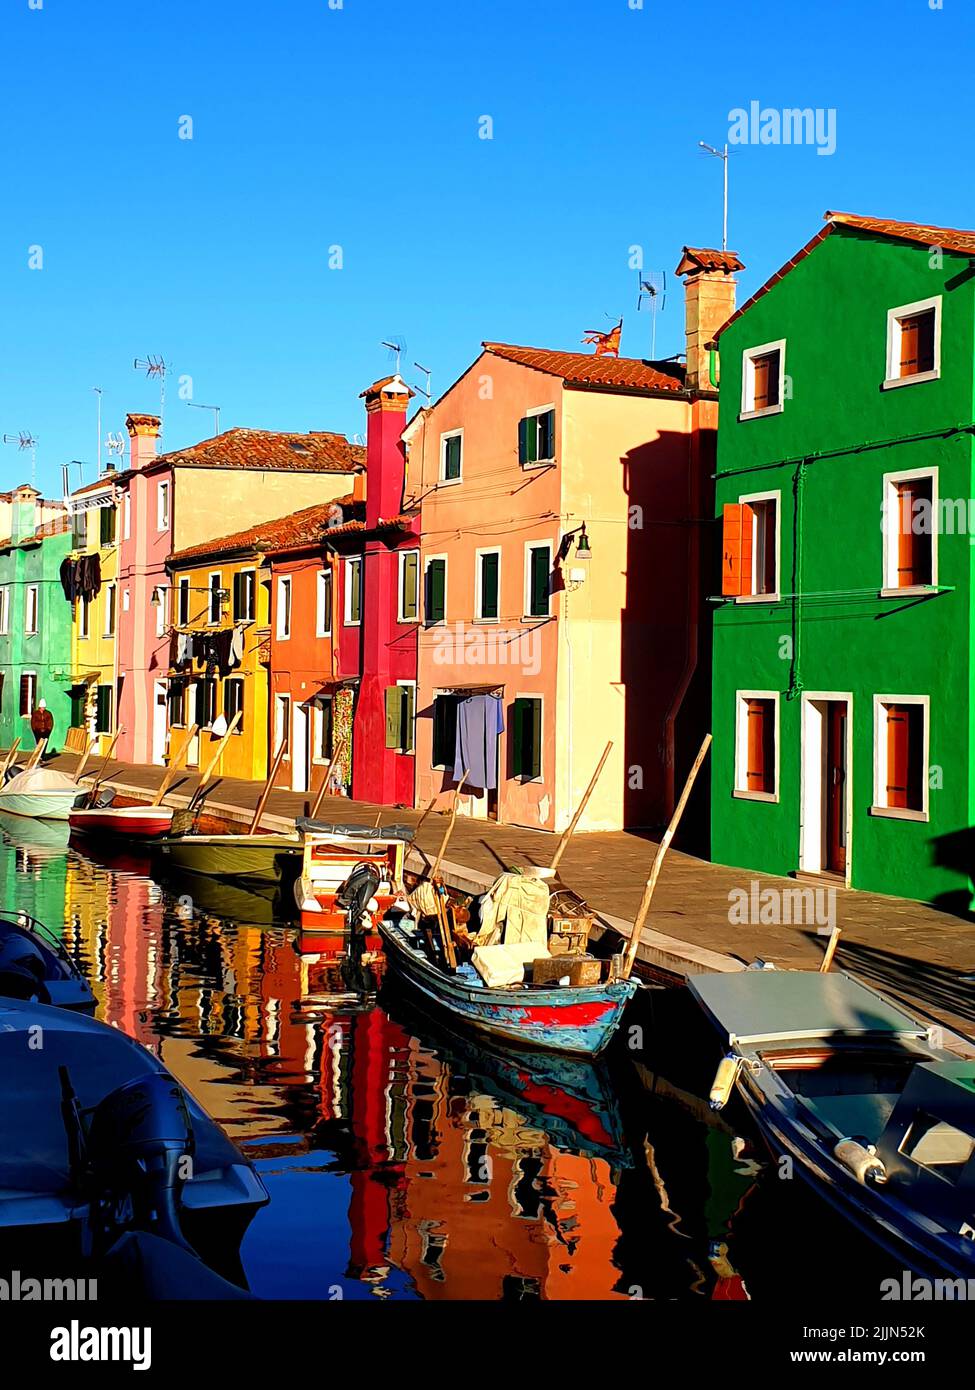 A low-angle shot of colorful painted houses on Burano island, Venice, Italy Stock Photo